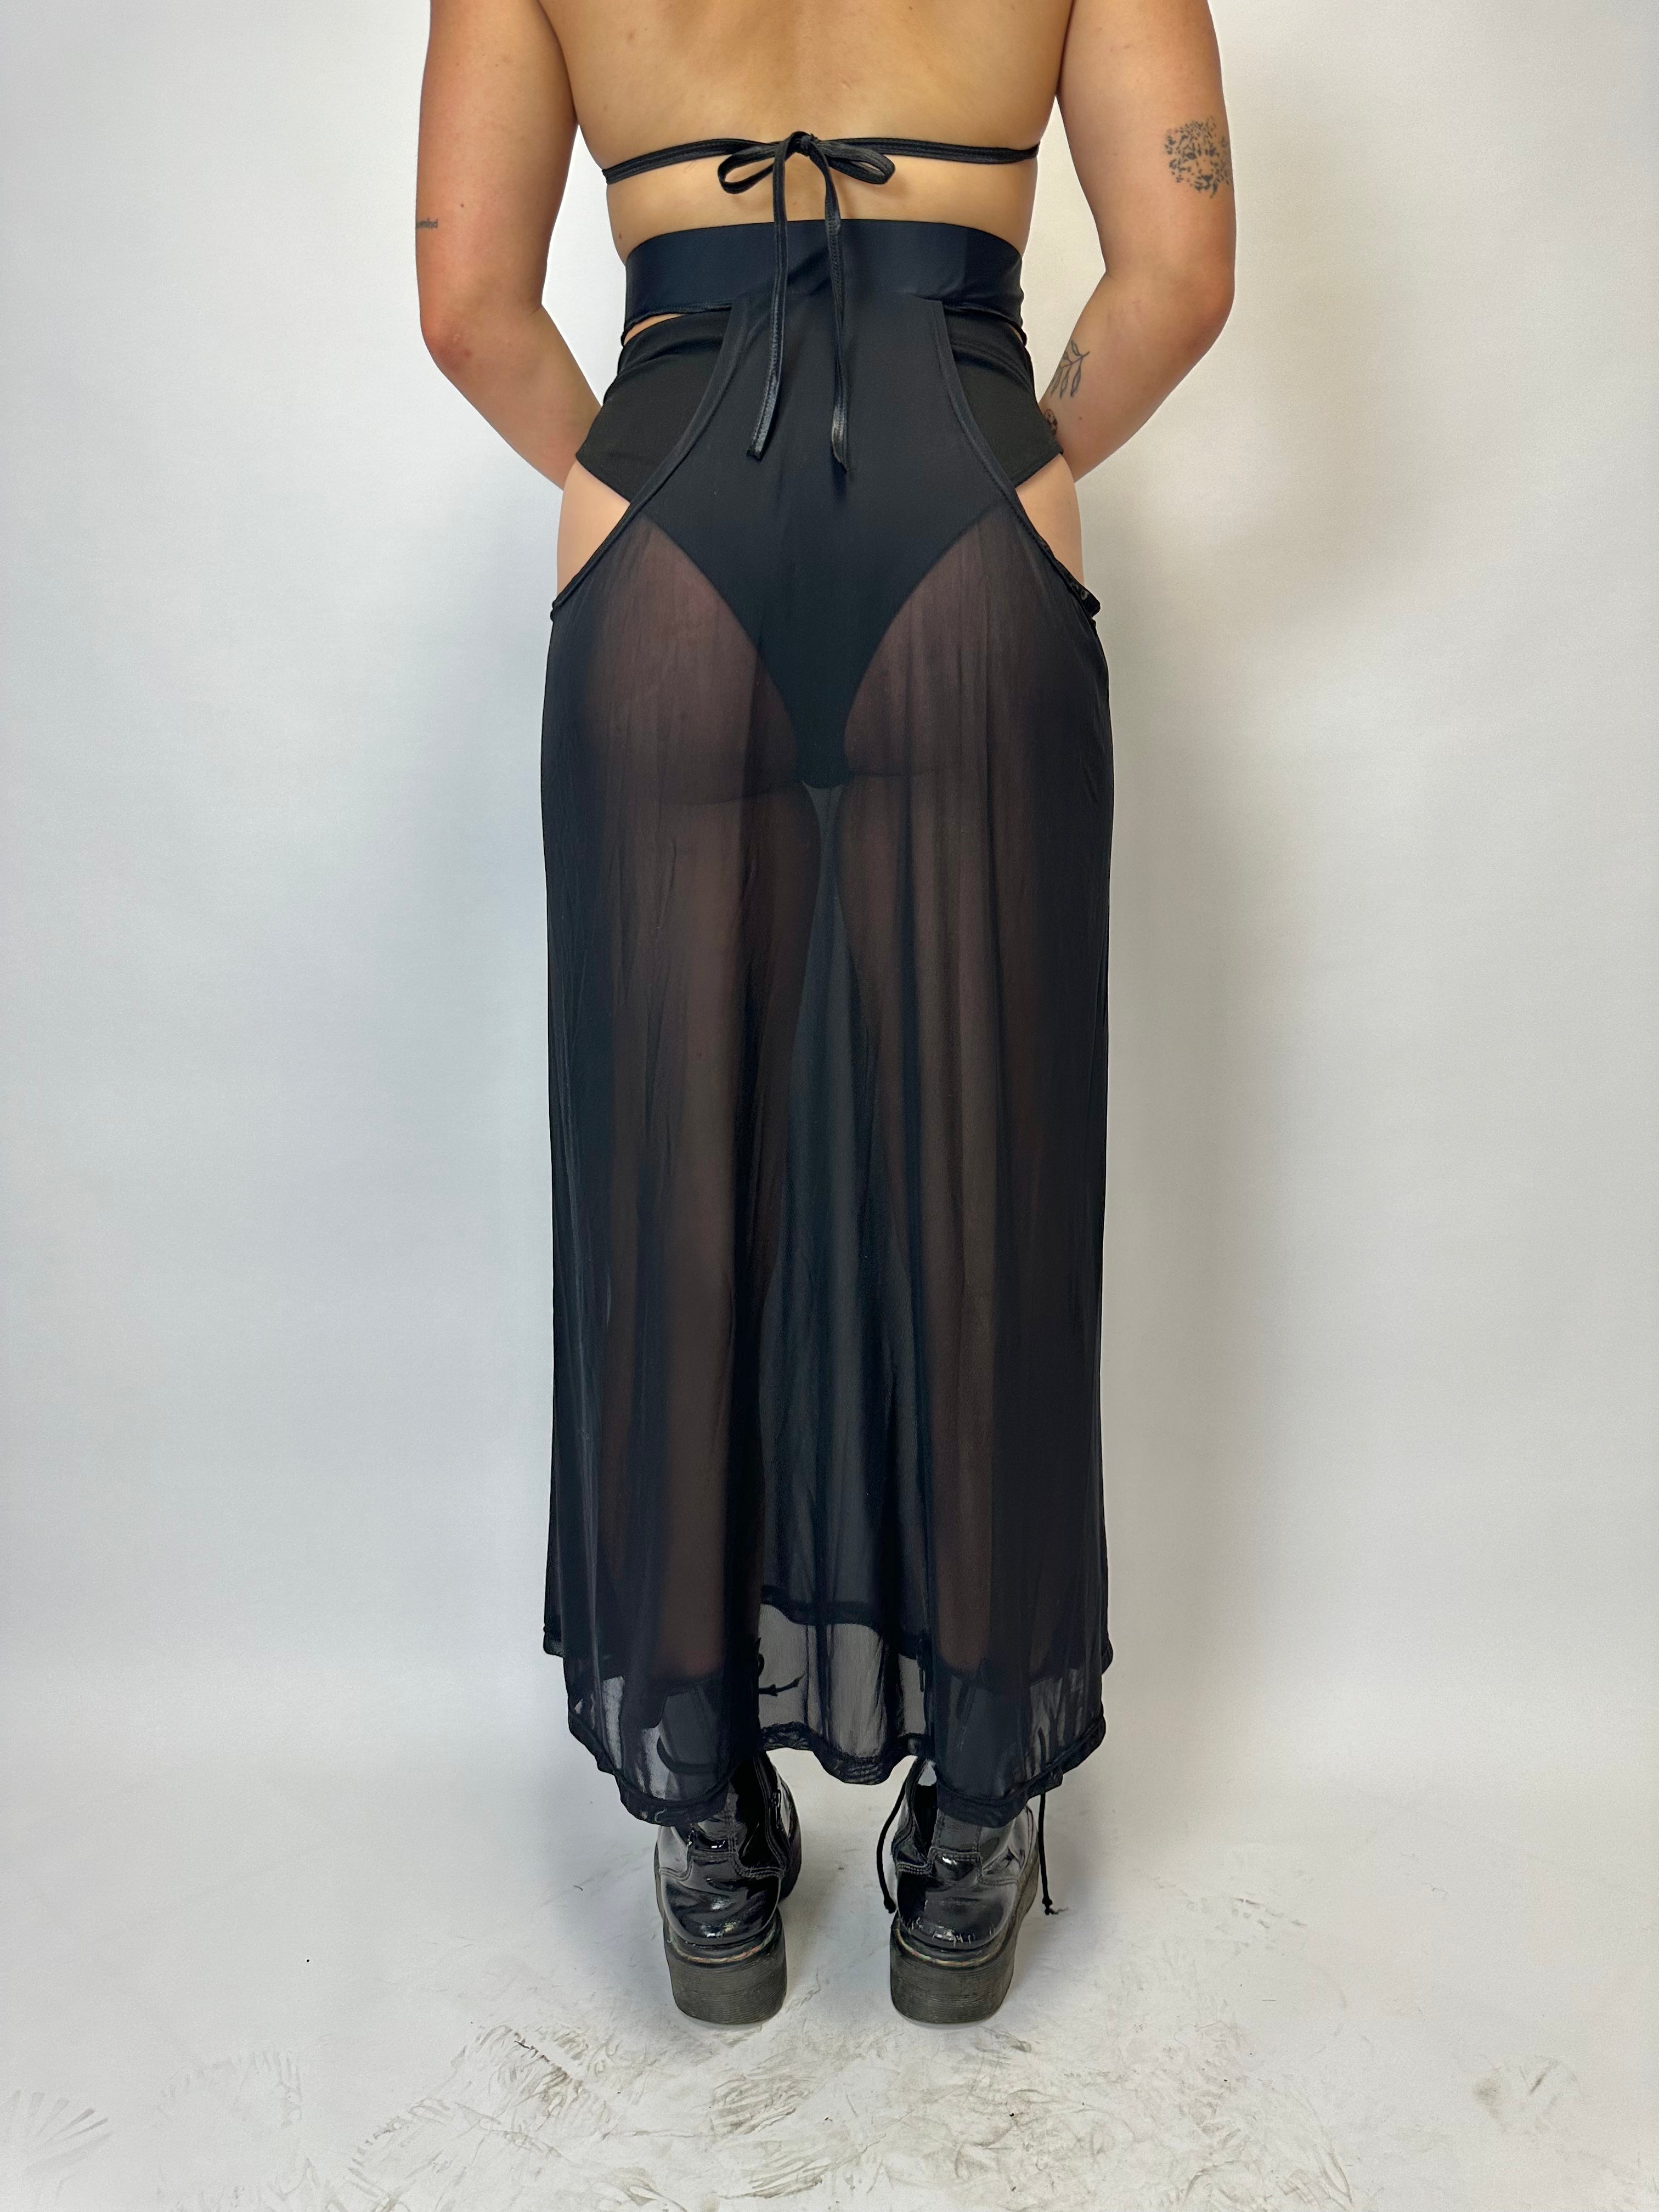 Black maxi mesh skirt with cut outs by Claudia Vitali